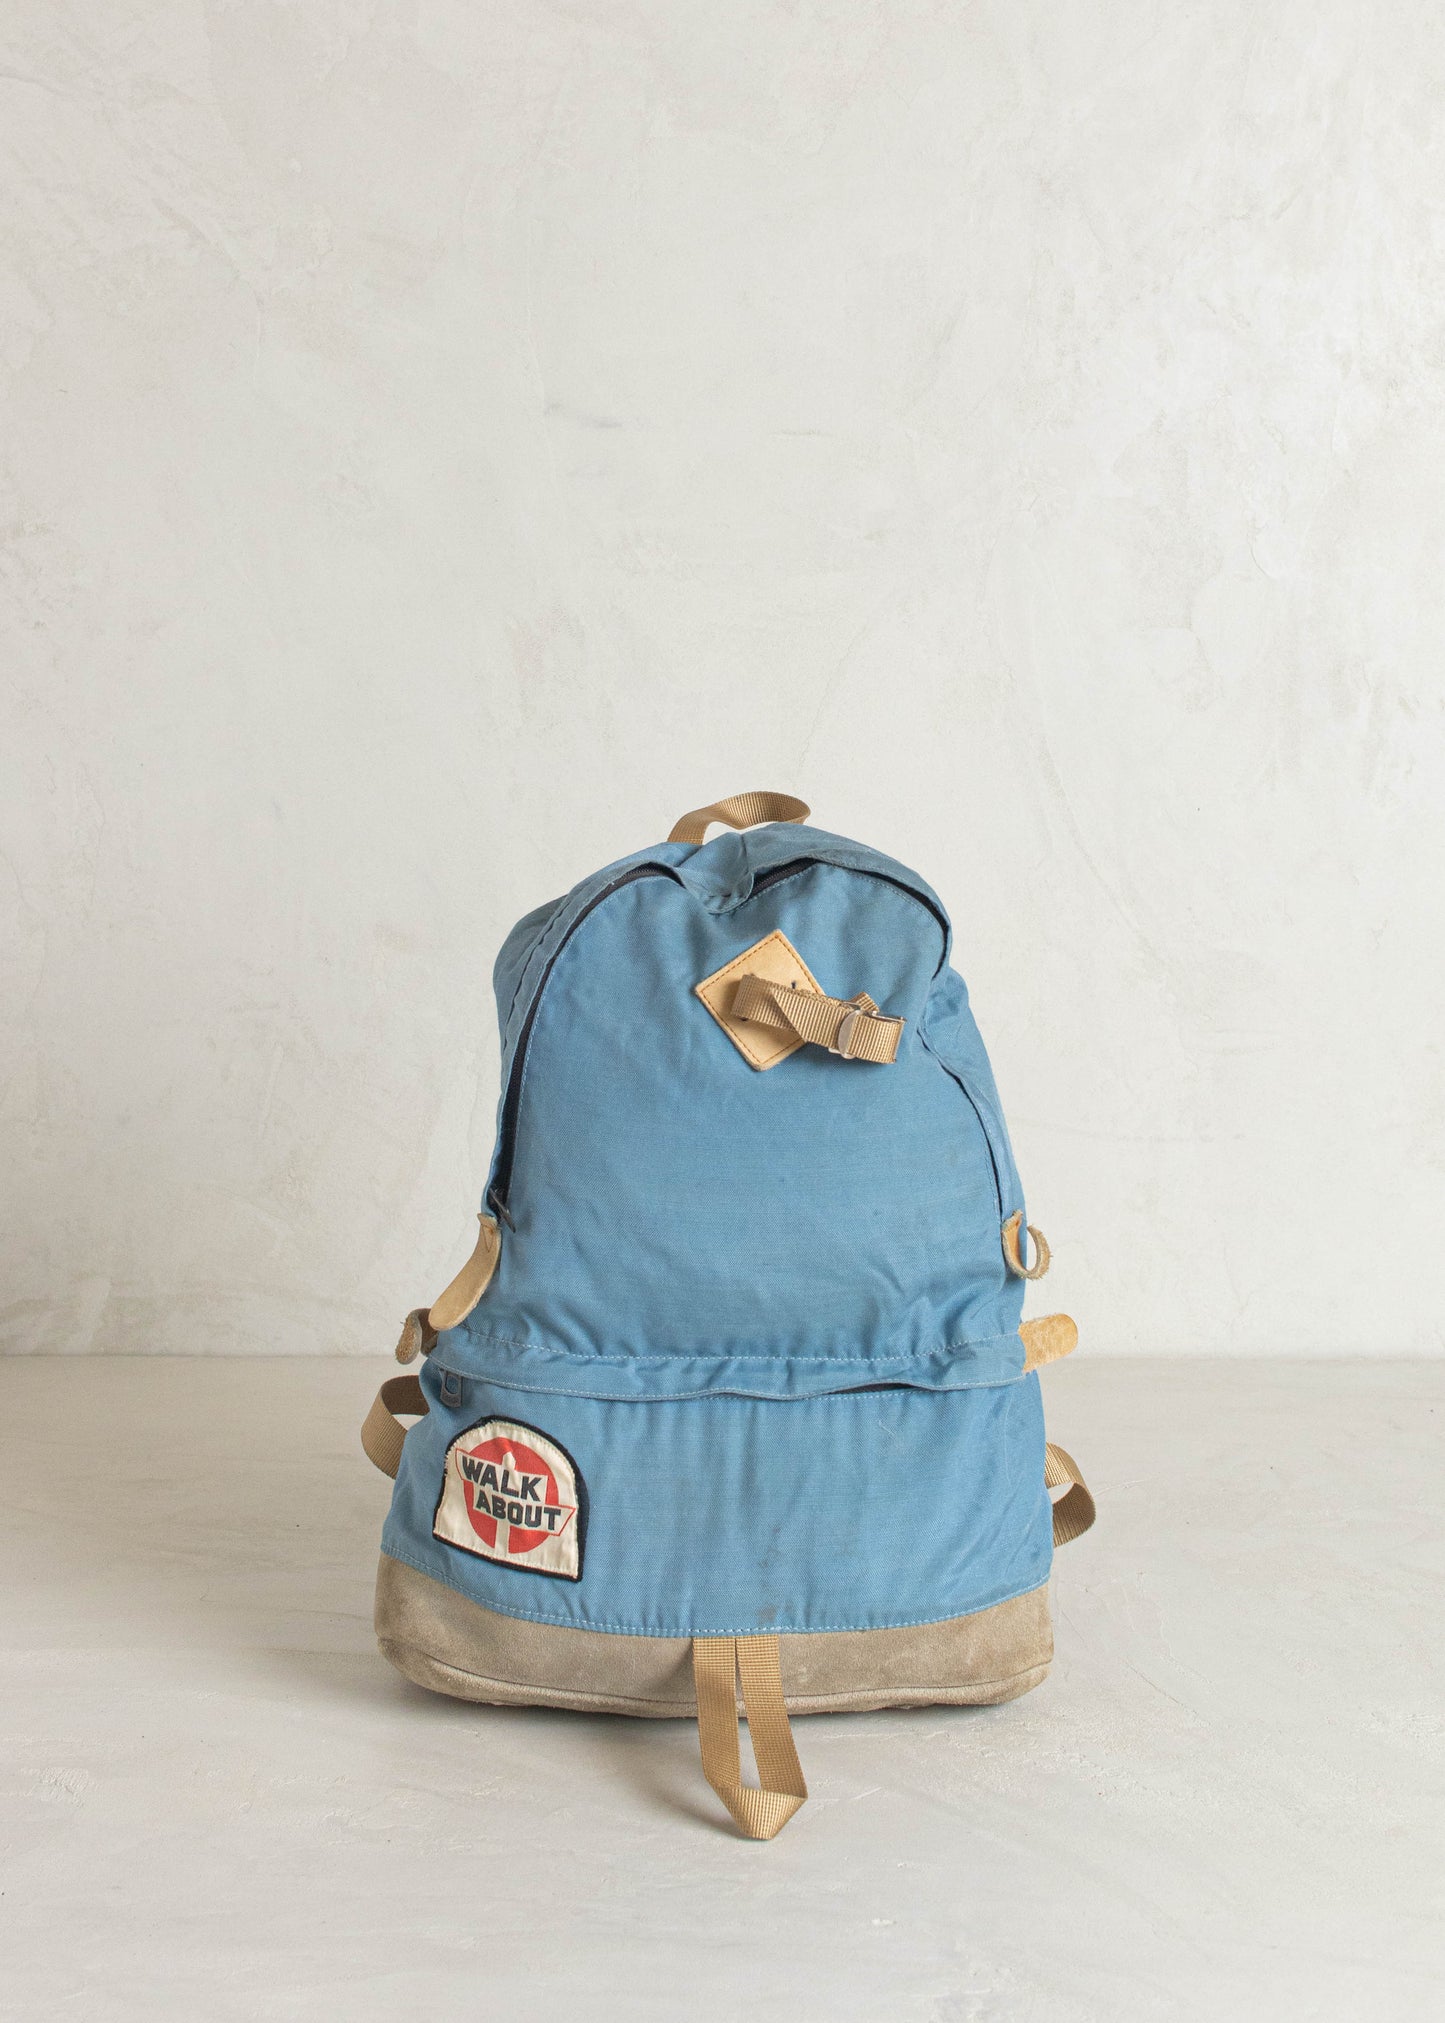 1980s Walkabout Backpack